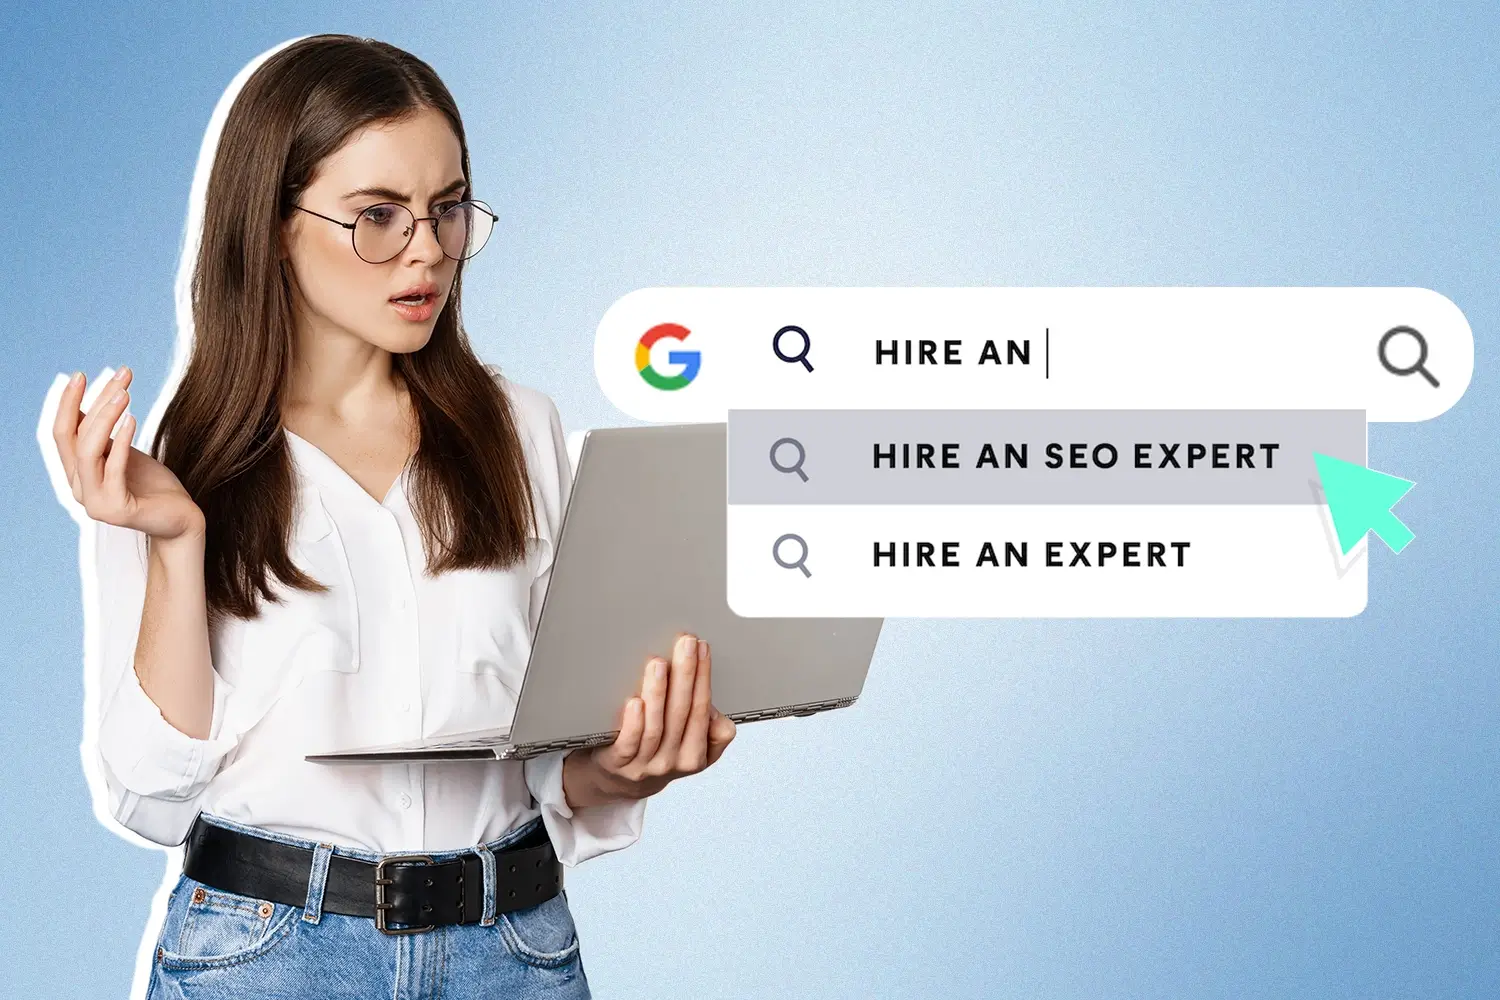 A digital marketing professional searching on Google for the things she needs to consider before hiring an SEO agency.